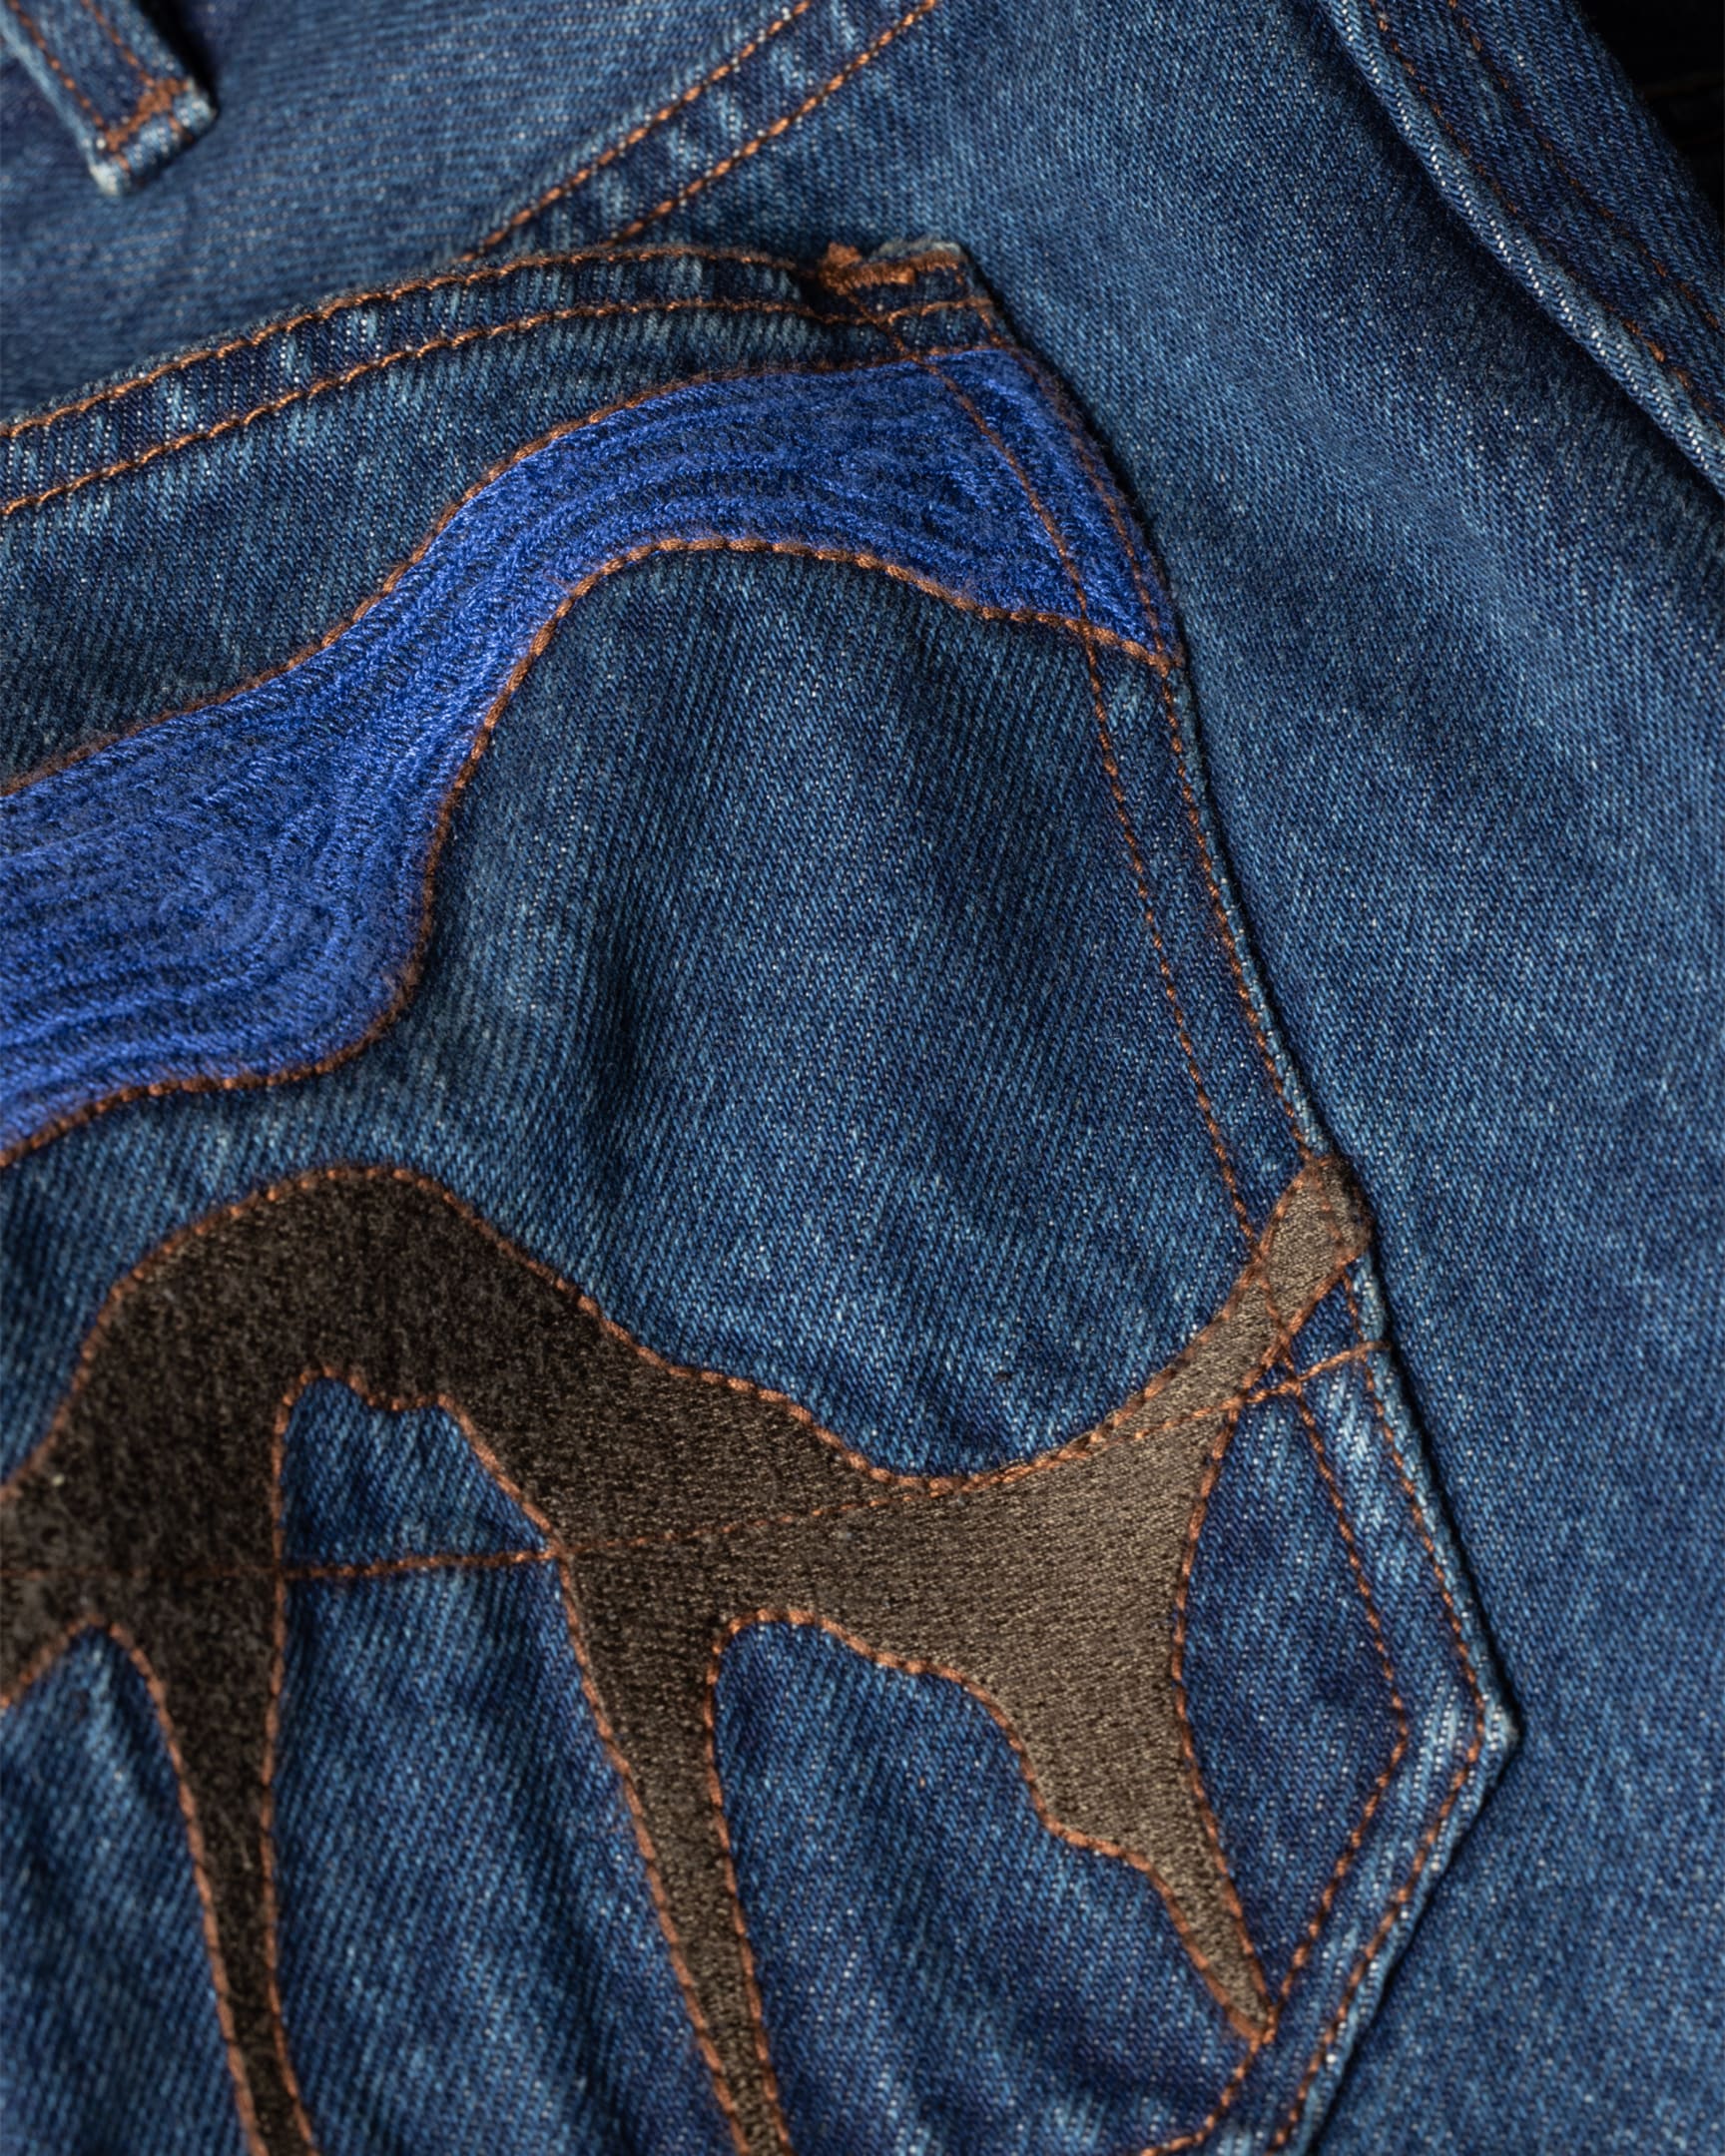 Detail View - Relaxed-Fit Dark-Wash 'Plains' Embroidered Jeans Paul Smith